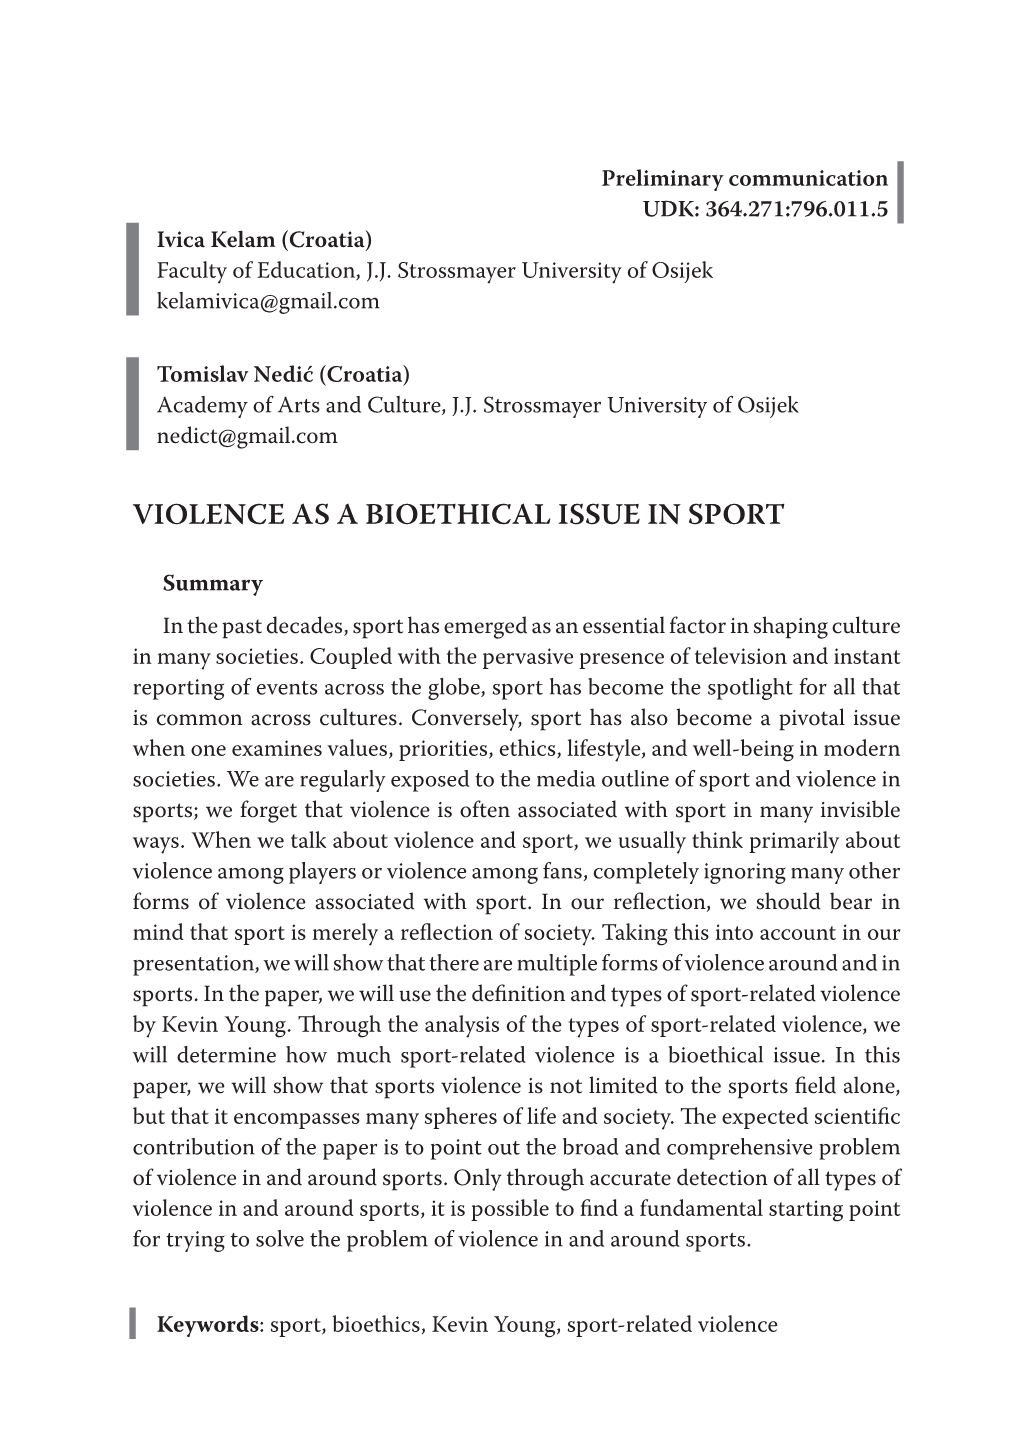 Violence As a Bioethical Issue in Sport